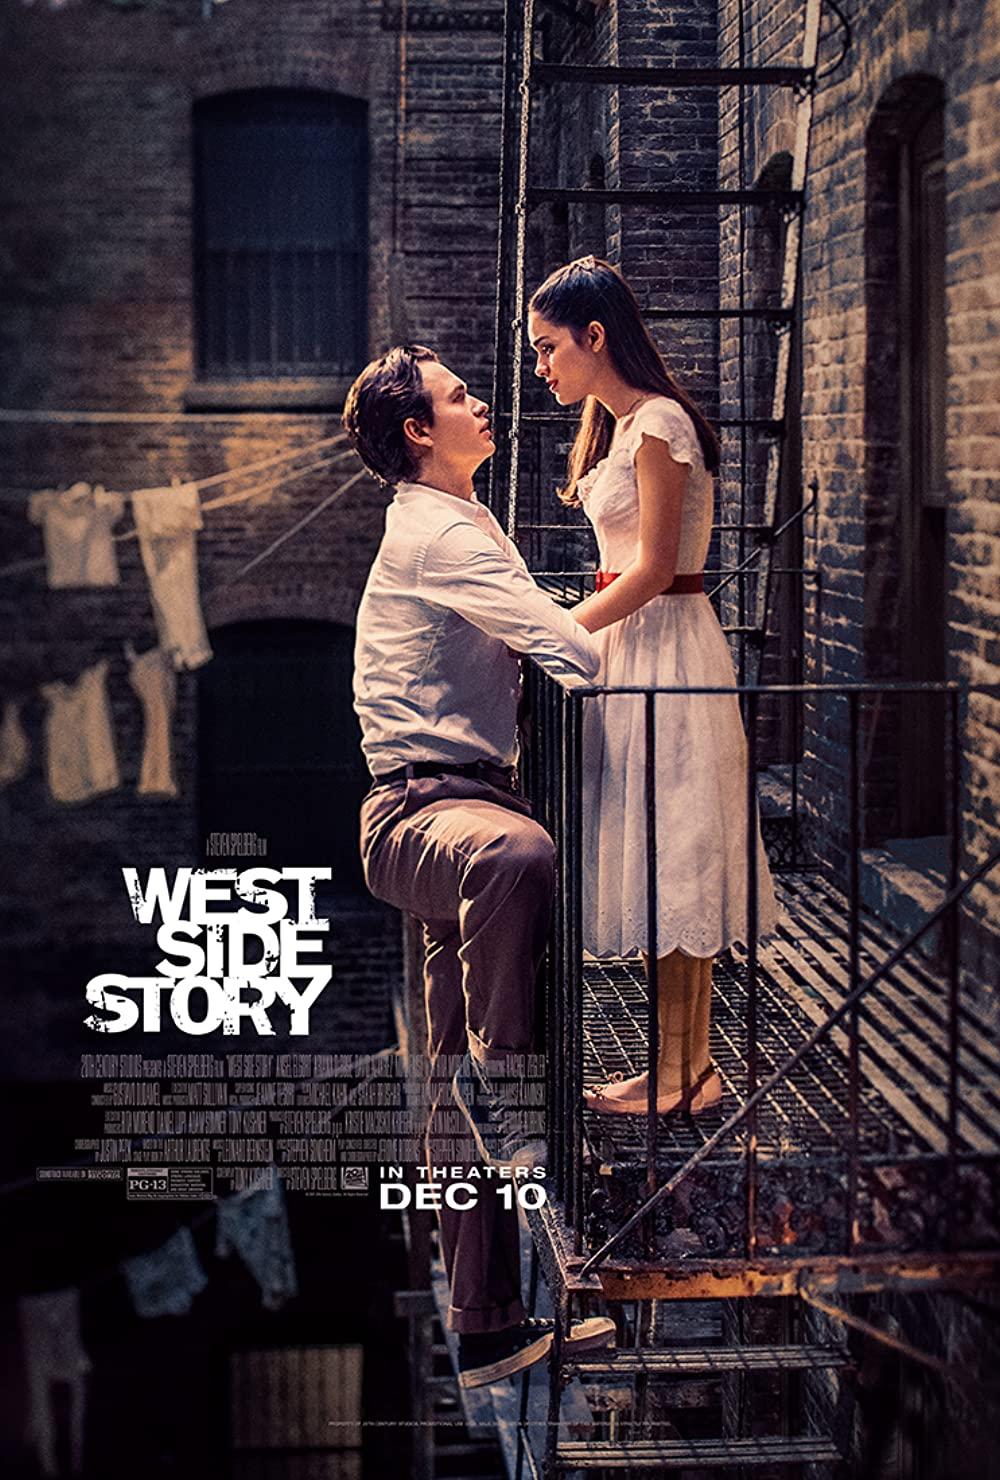 Image of the movie cover featuring a man climbing on a building fire escape to reach a young woman standing on the fire escape. Like the Romeo and Juliet Balcony scene.